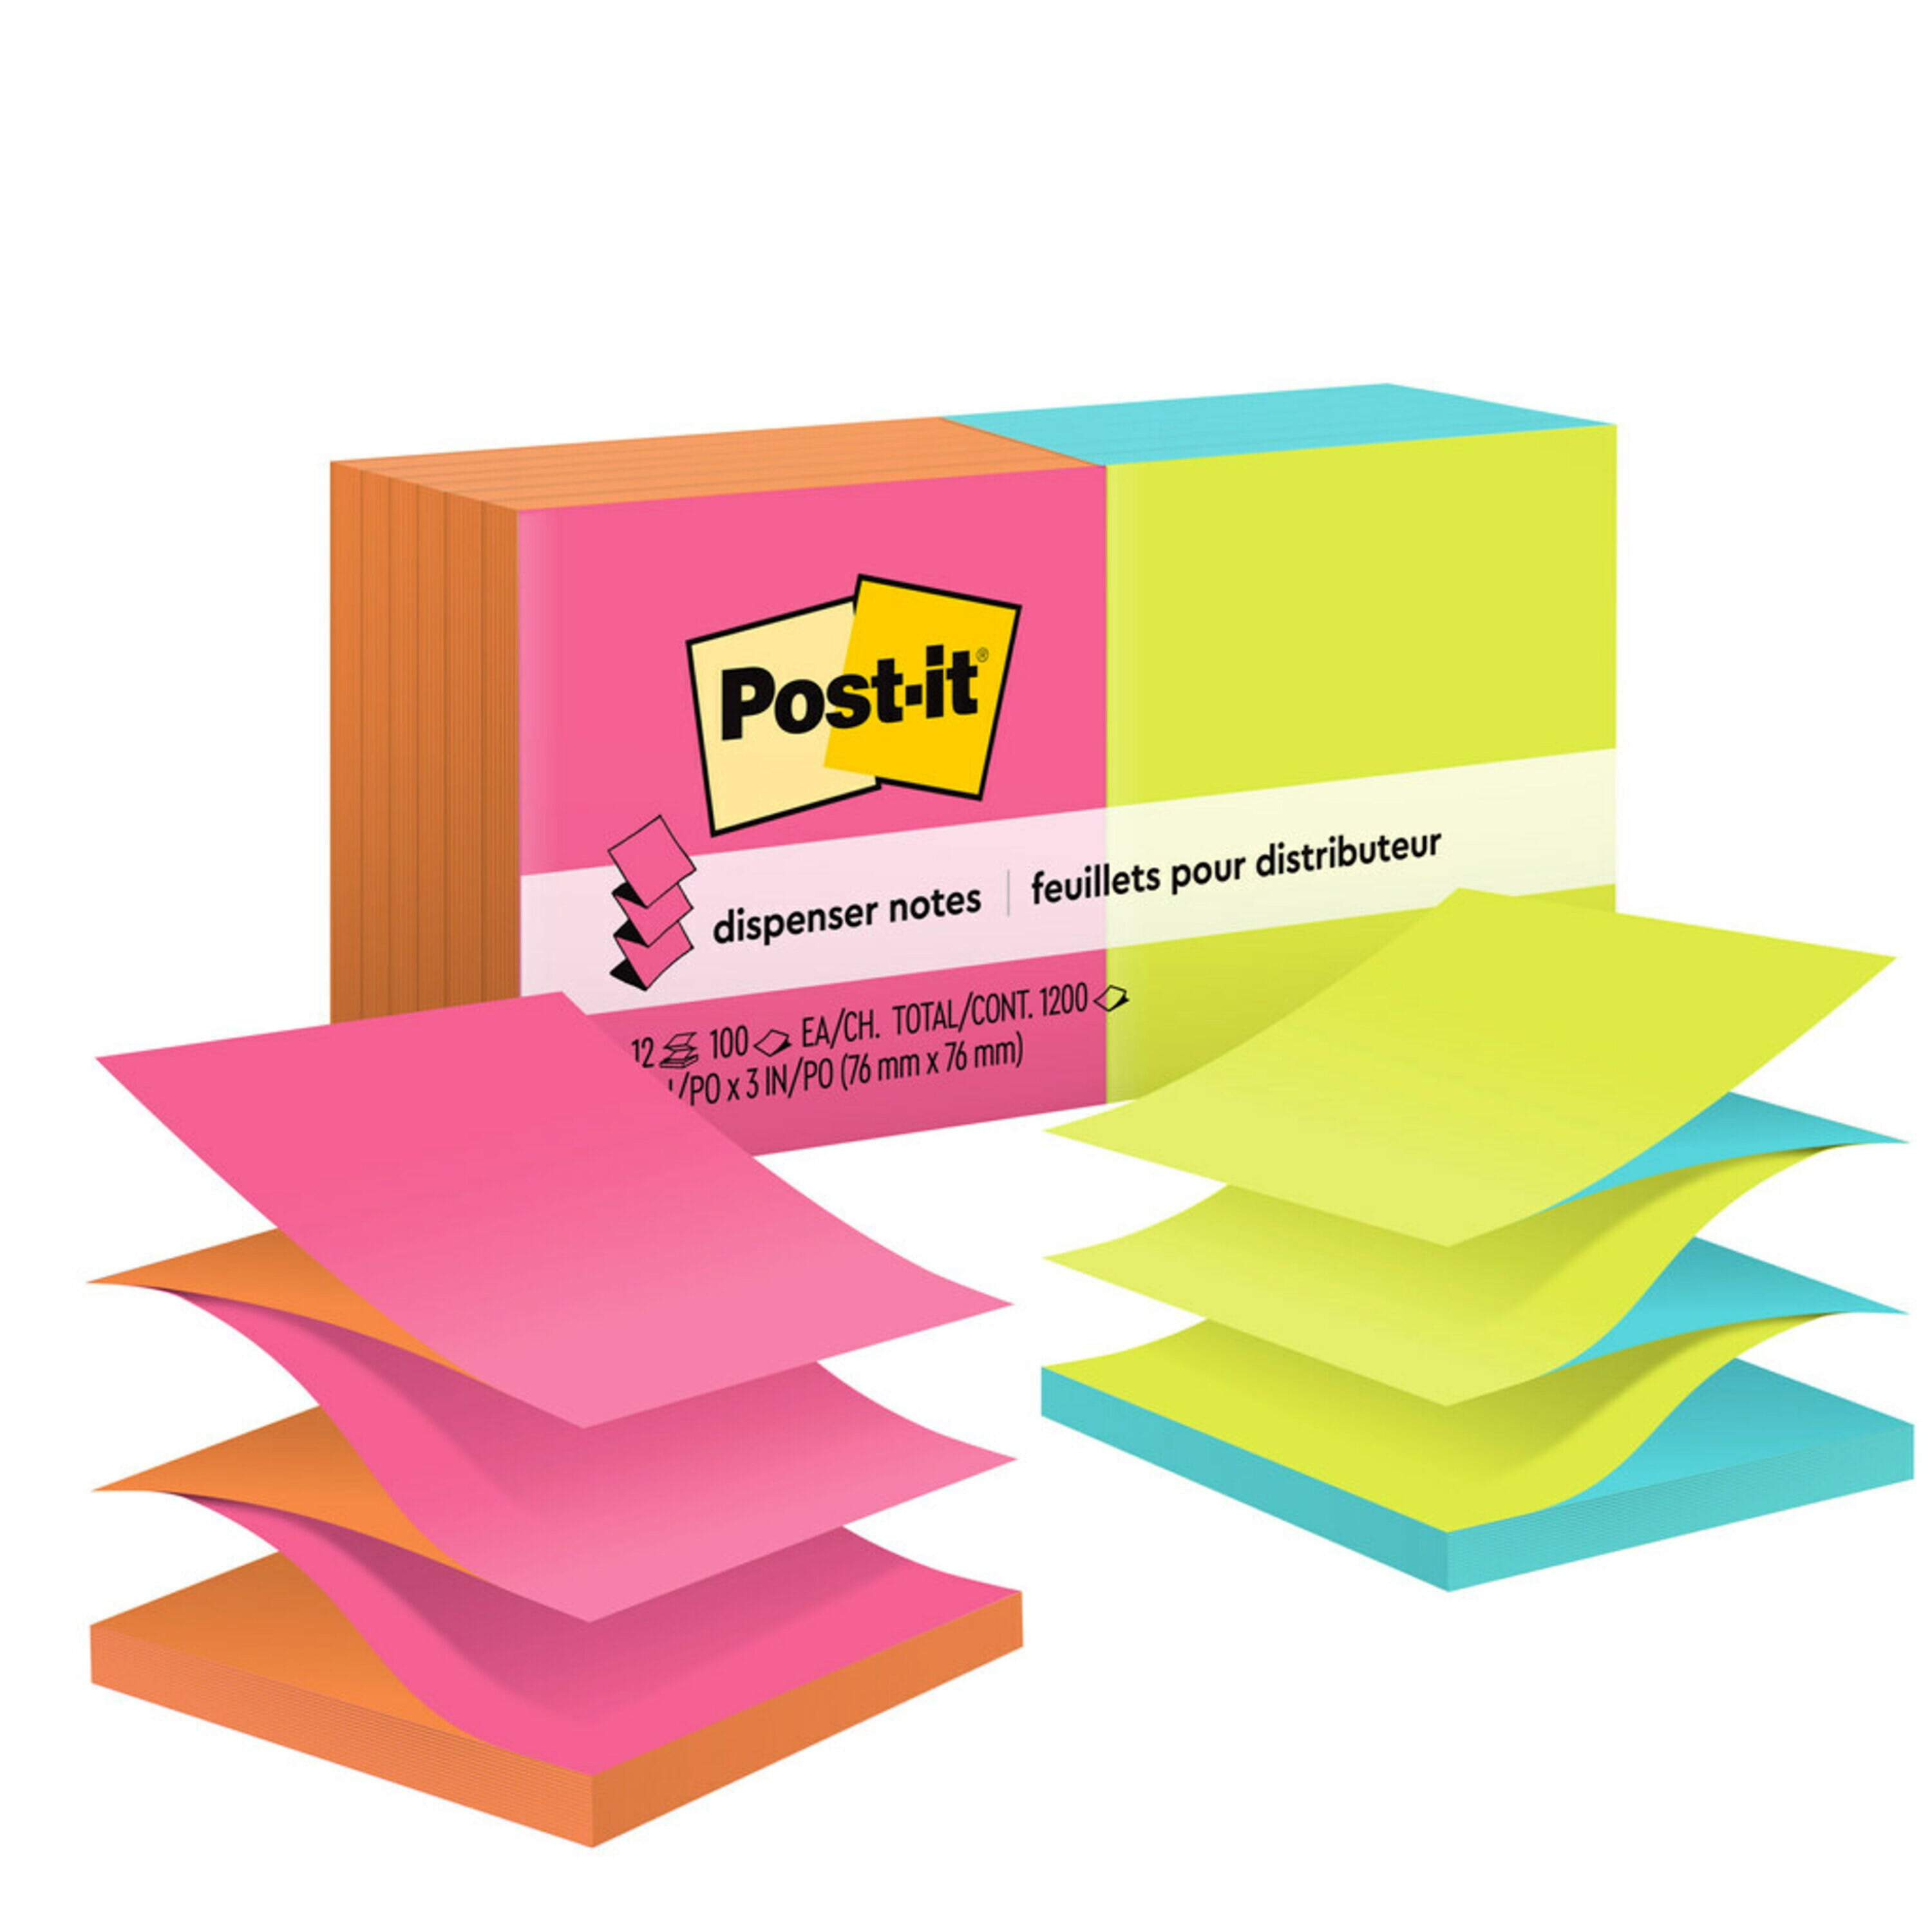 Post-it® Transparent Notes, 2.8 in. x 2 .8 in., 1 Pad/Pack